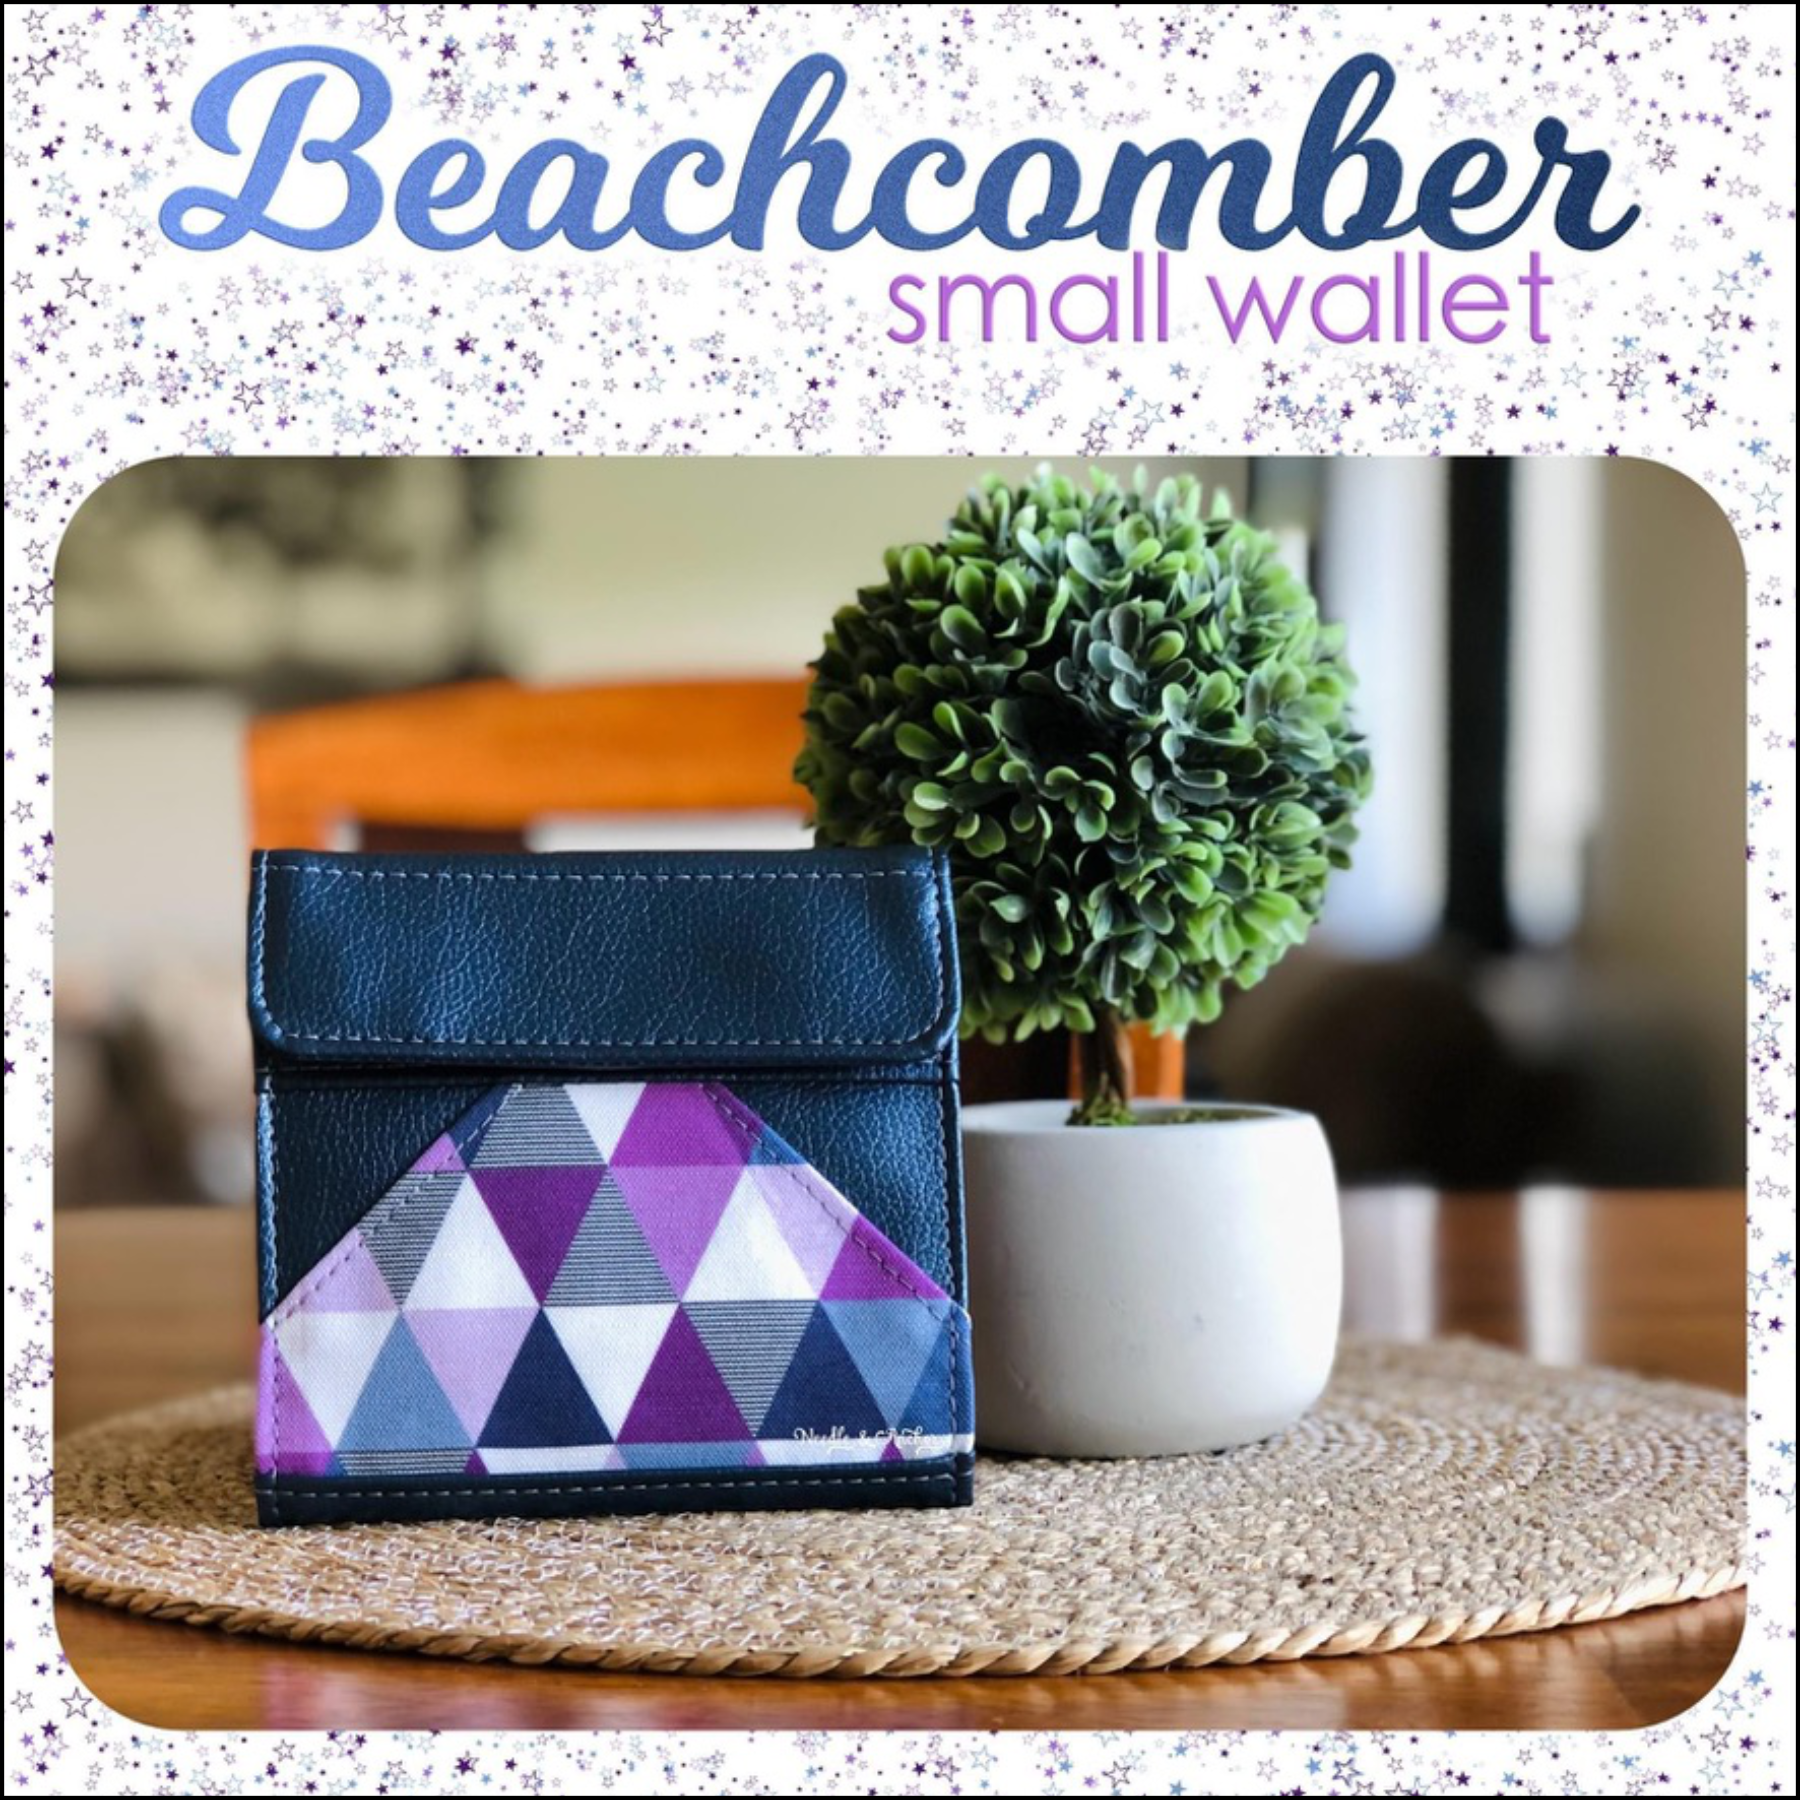 BEACHCOMBER SMALL WALLET.png